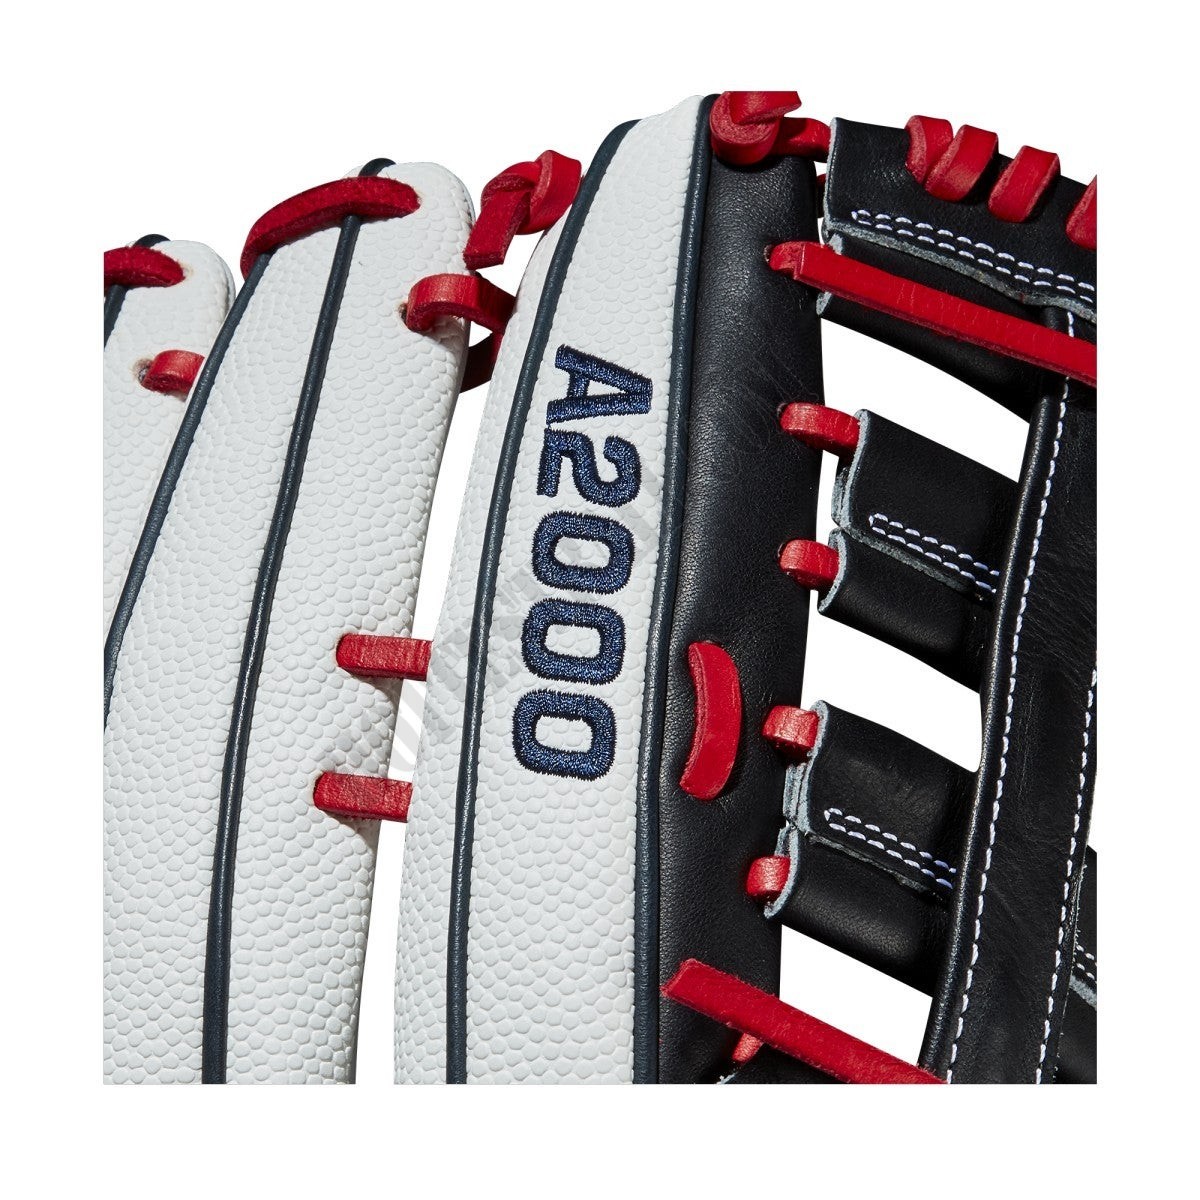 2020 A2000 SP135 13.5" Slowpitch Softball Glove ● Wilson Promotions - -5